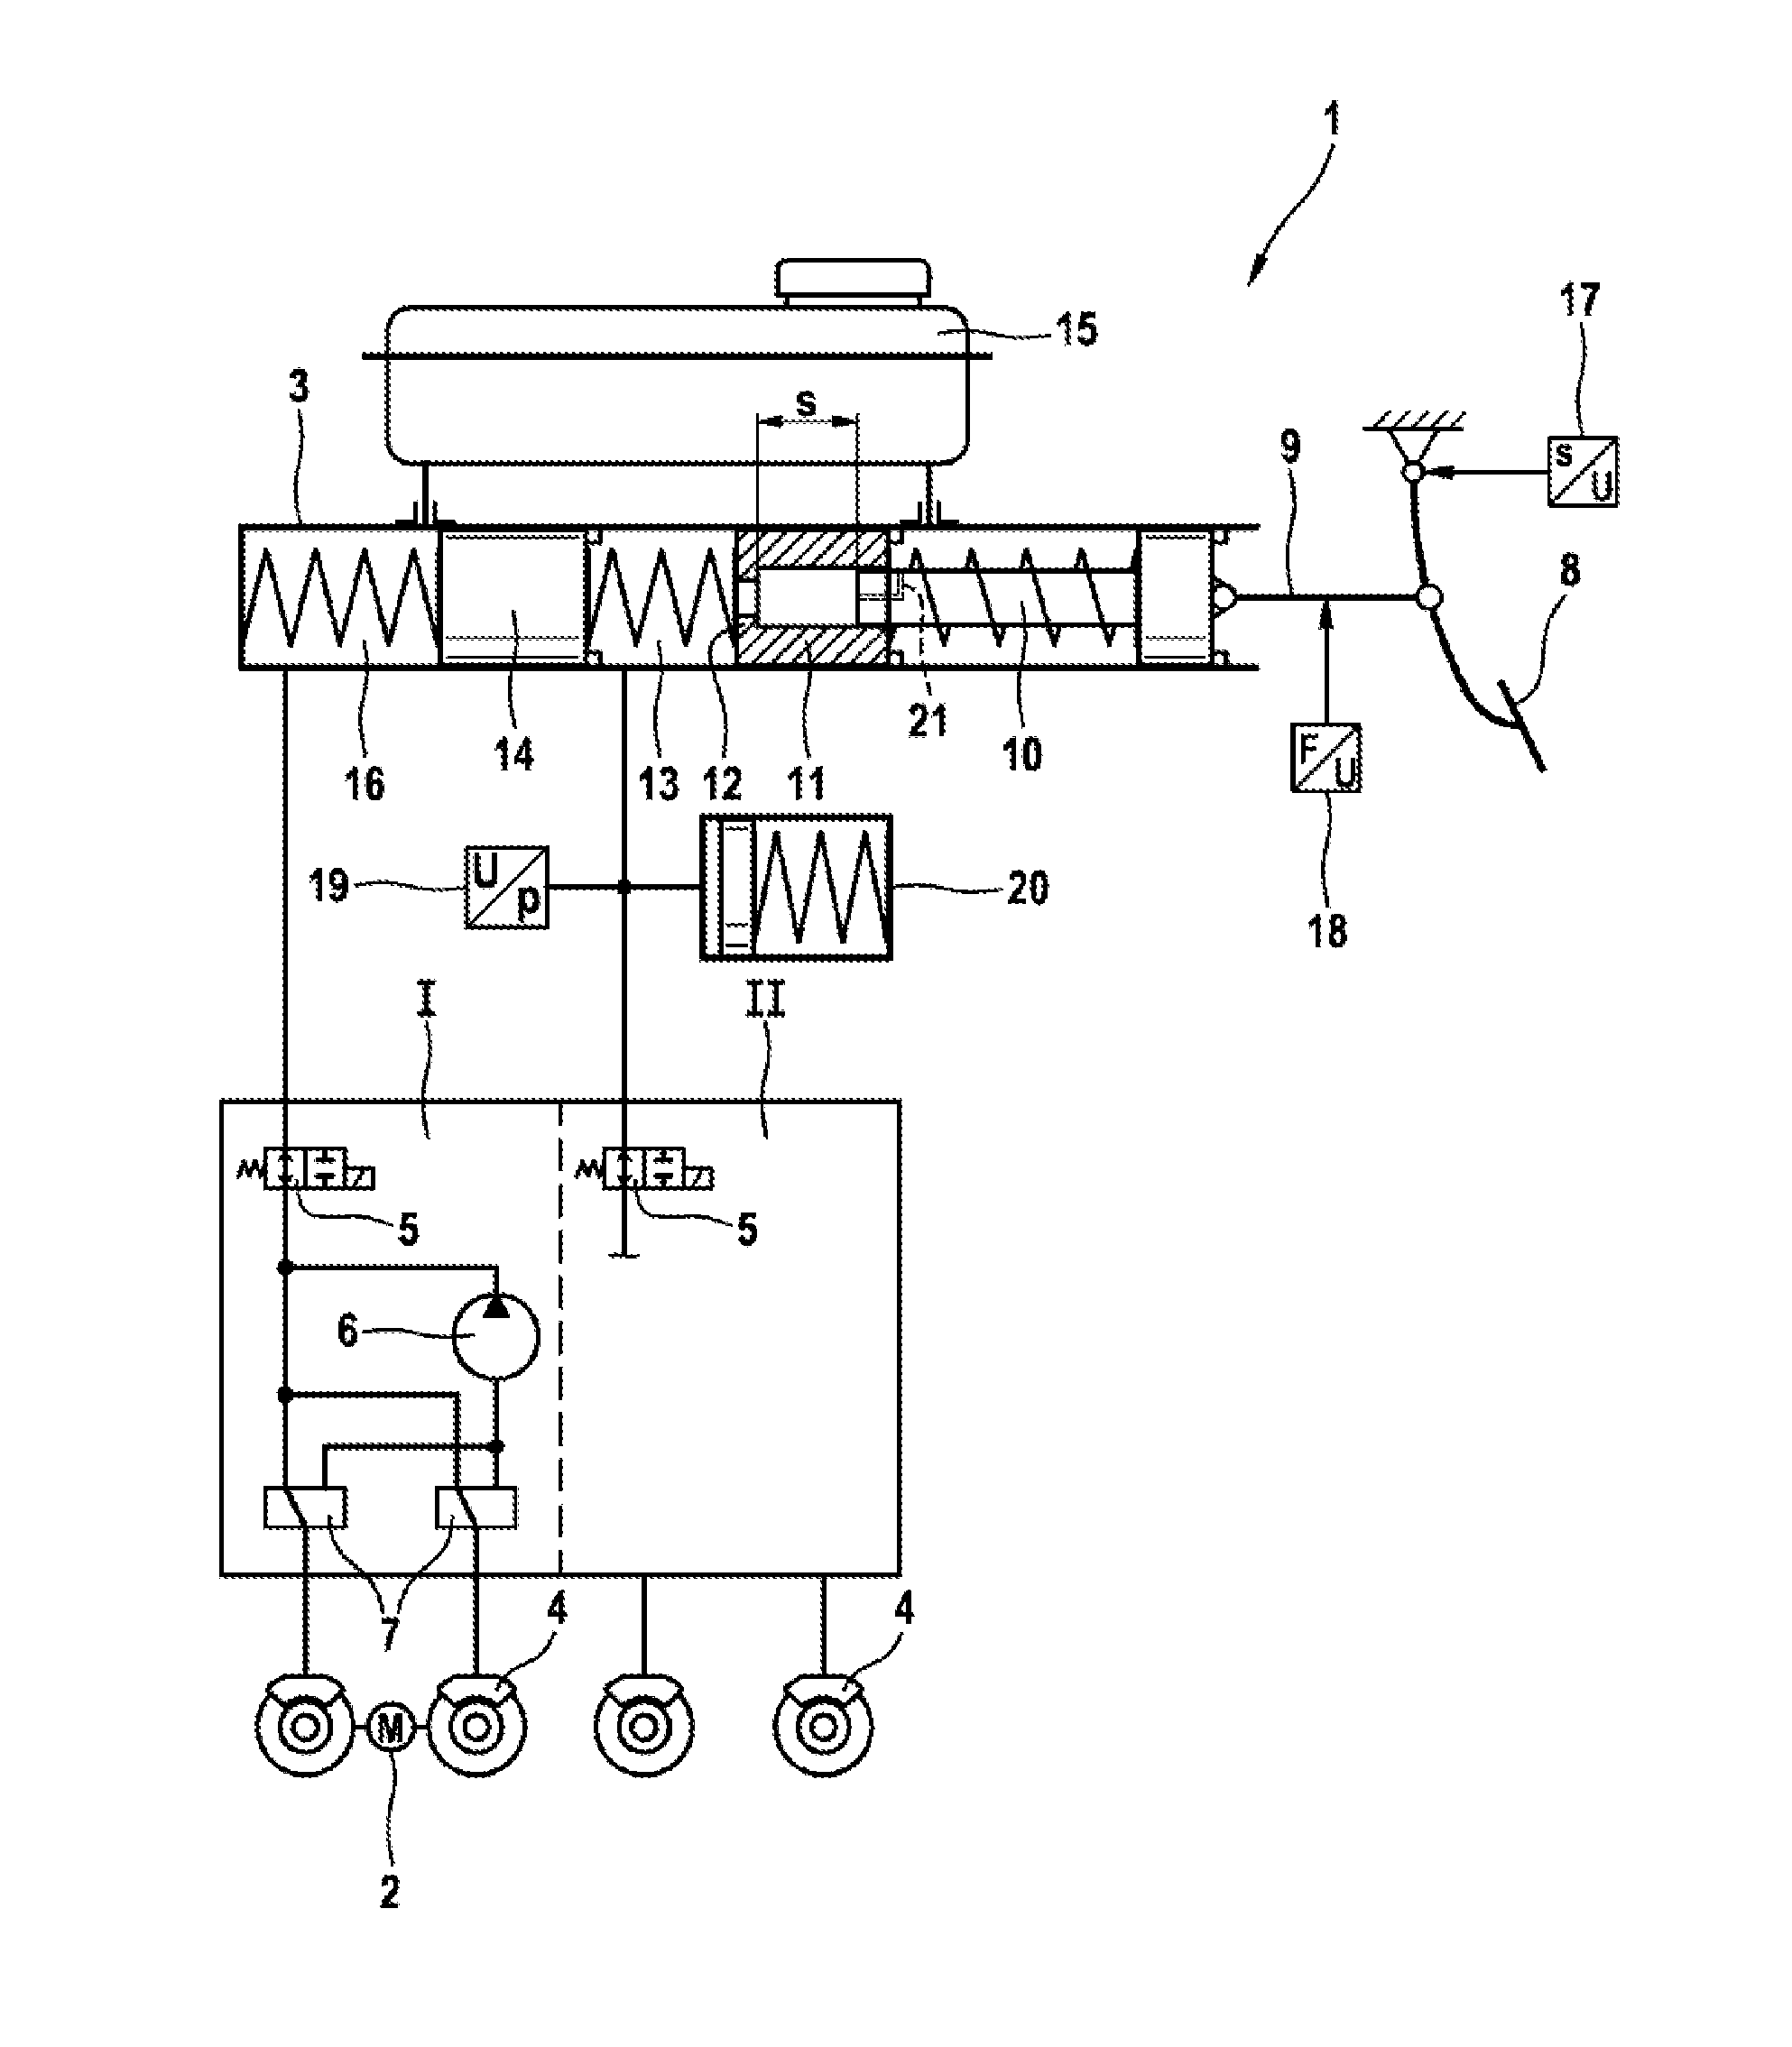 Main Brake Cylinder for a Hydraulic Vehicle Brake System and Method for Operating Same